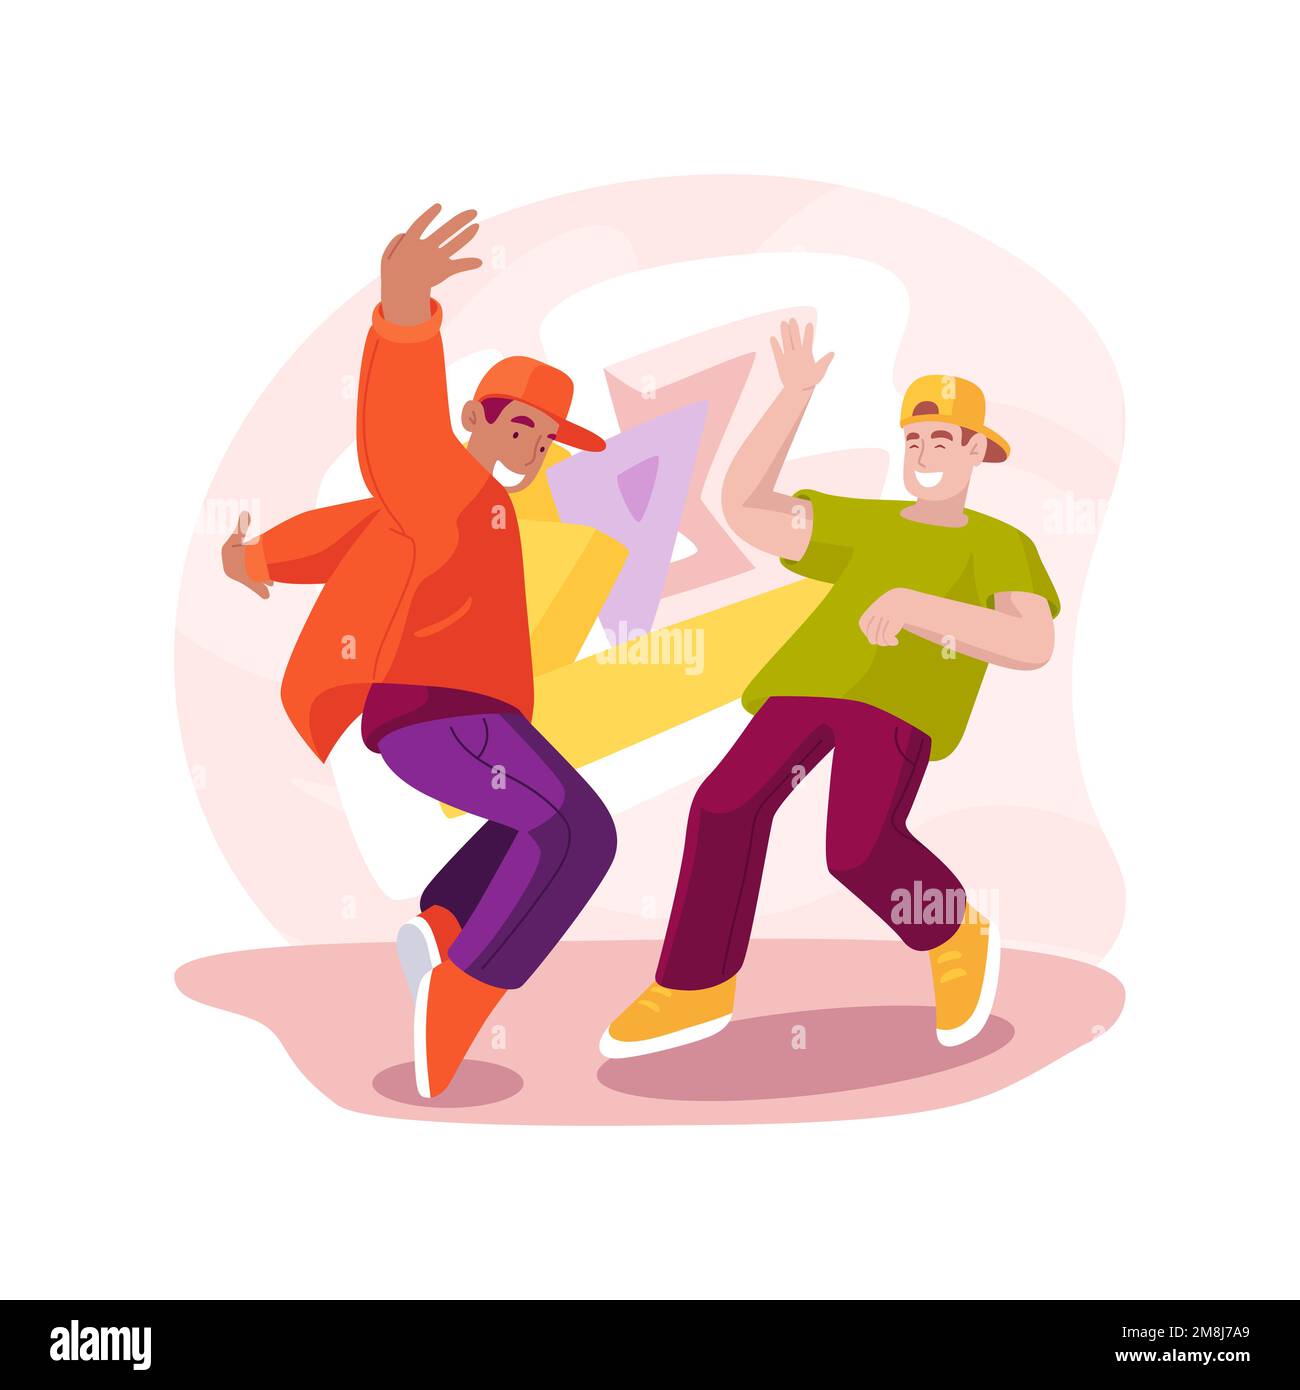 Hip hop battle isolated cartoon vector illustration. Young teenage boys dancing hip-hop, teens lifestyle, leisure time together, having fun with frien Stock Vector